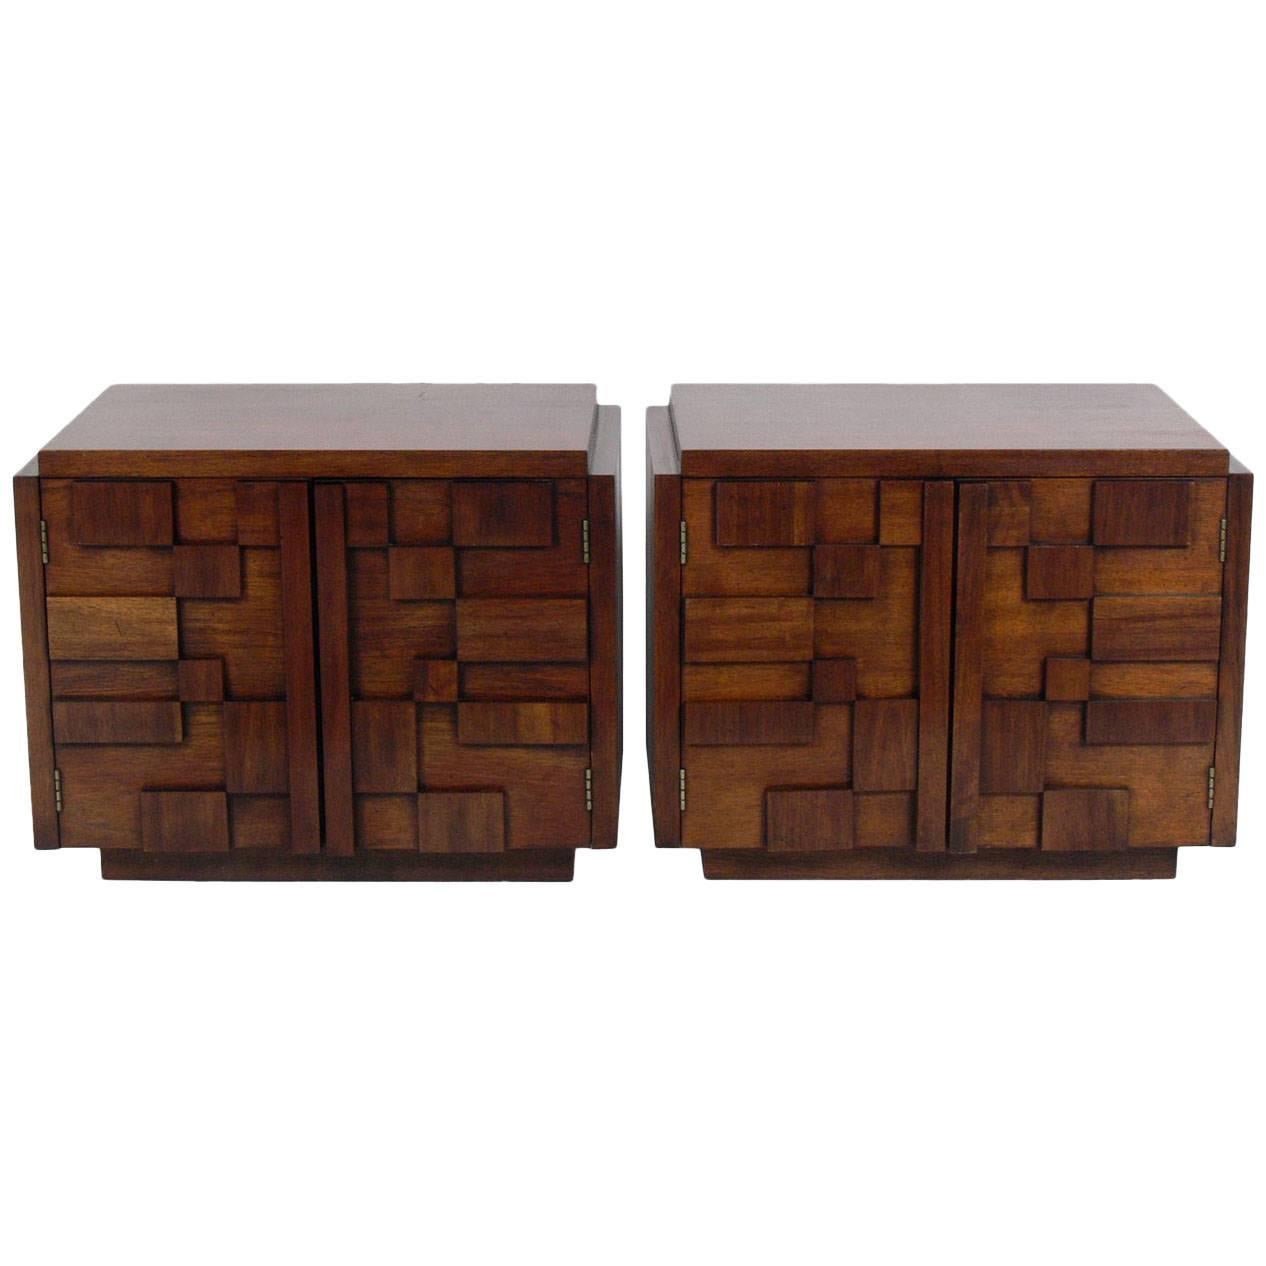 Pair of Sculptural Walnut Nightstands or End Tables